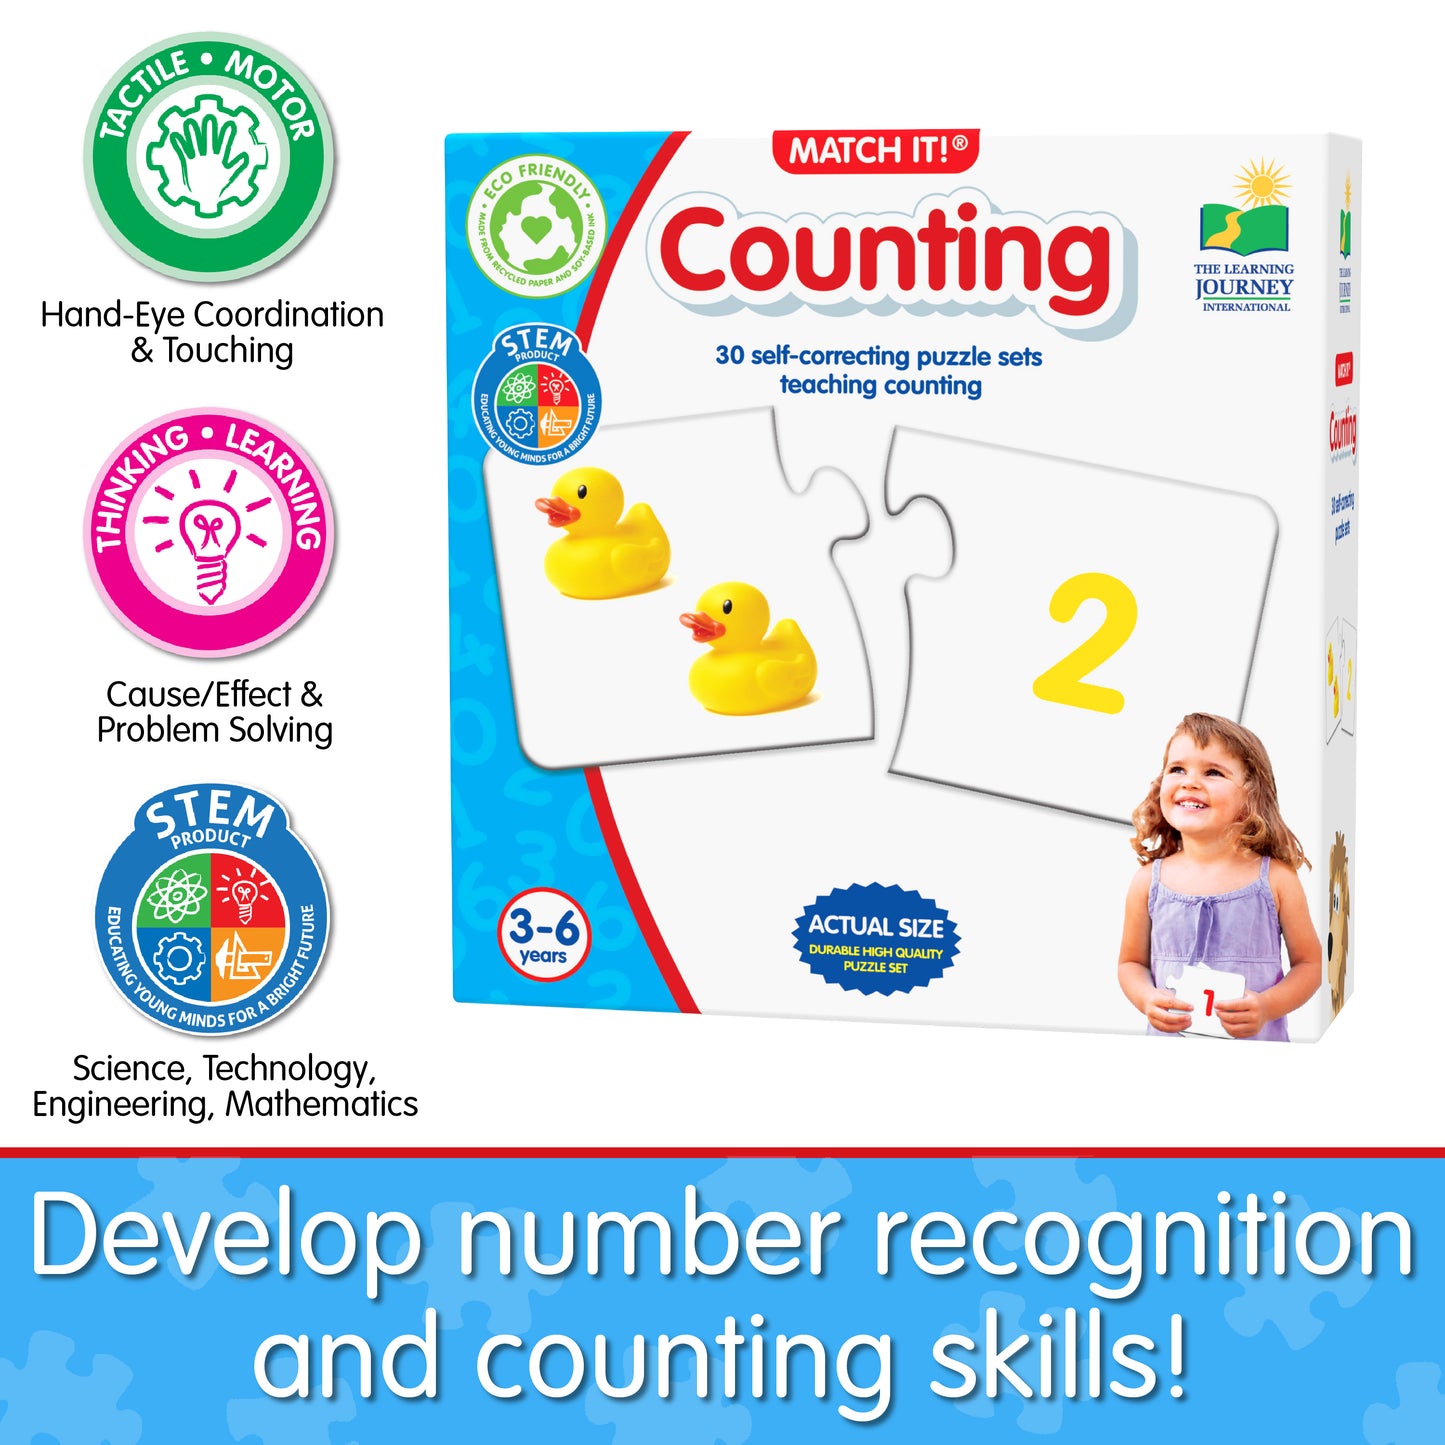 Infographic about Match It - Counting's educational benefits that says, "Develop number recognition and counting skills!"